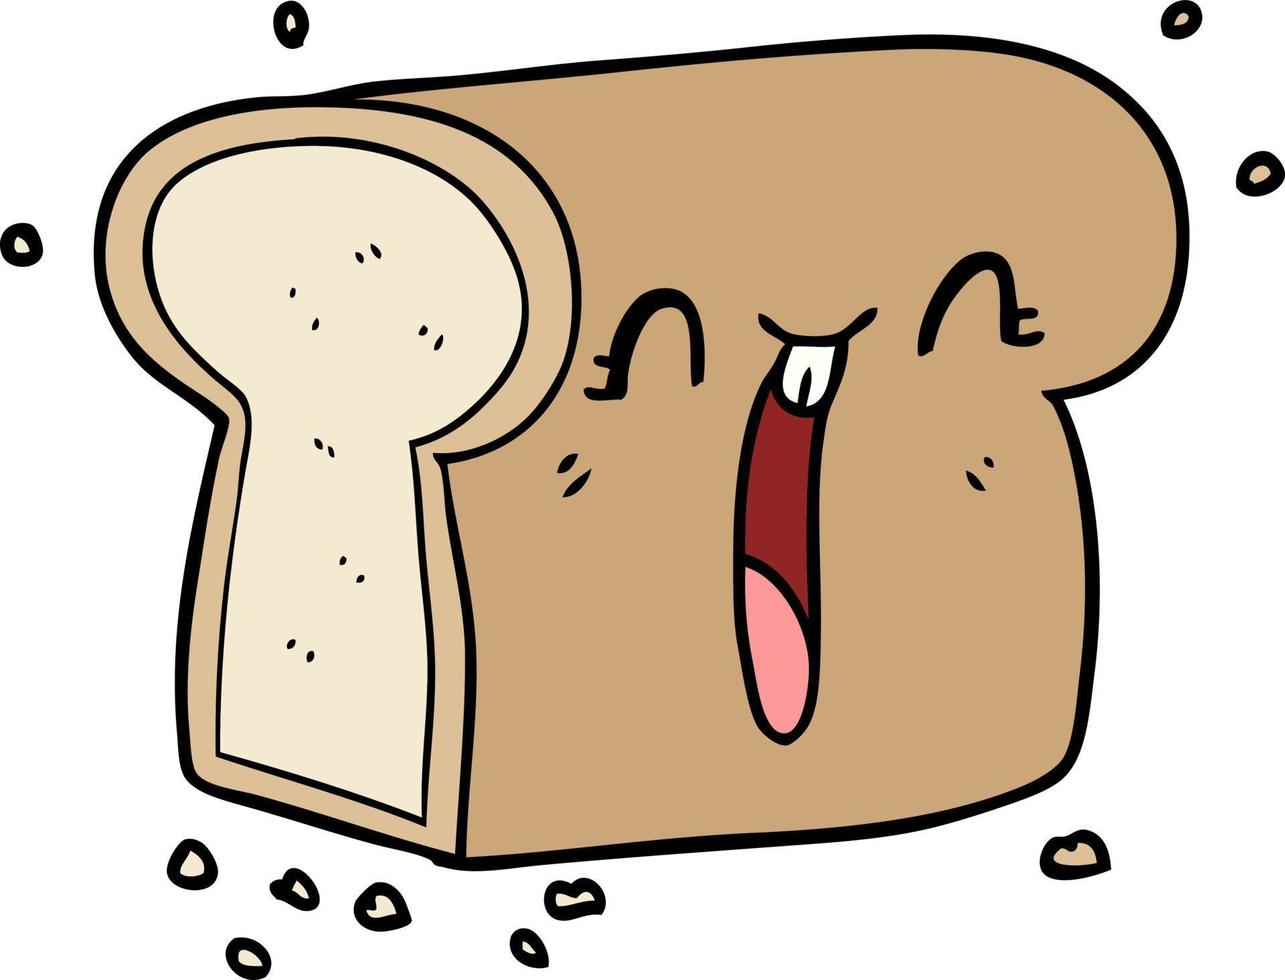 cartoon laughing loaf of bread vector